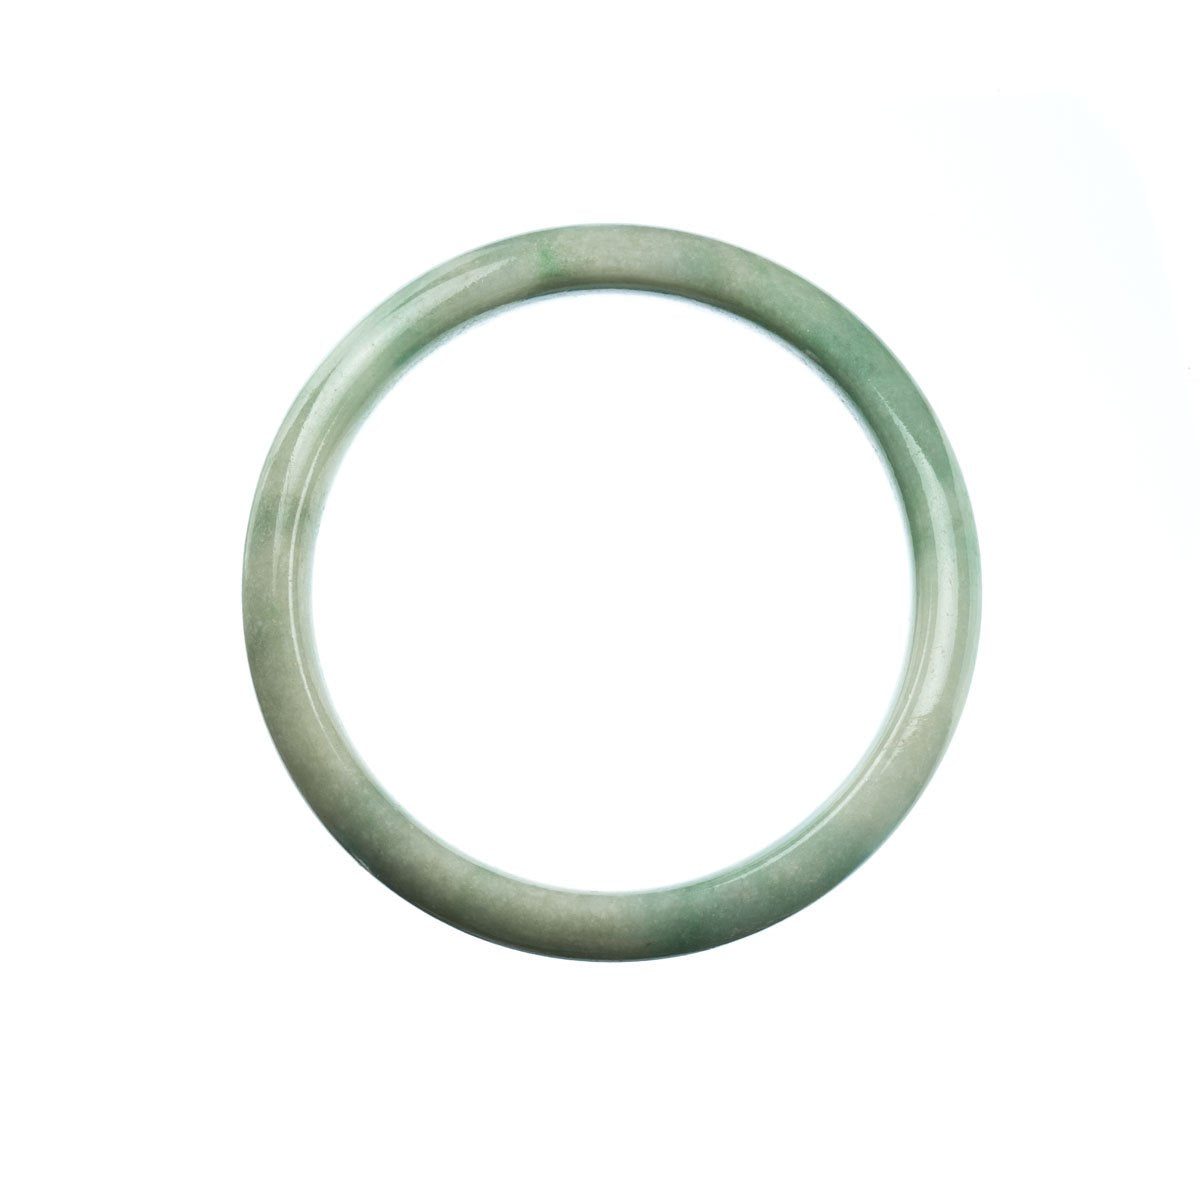 A half moon-shaped pale green jadeite jade bangle, 57mm in size, from MAYS GEMS.